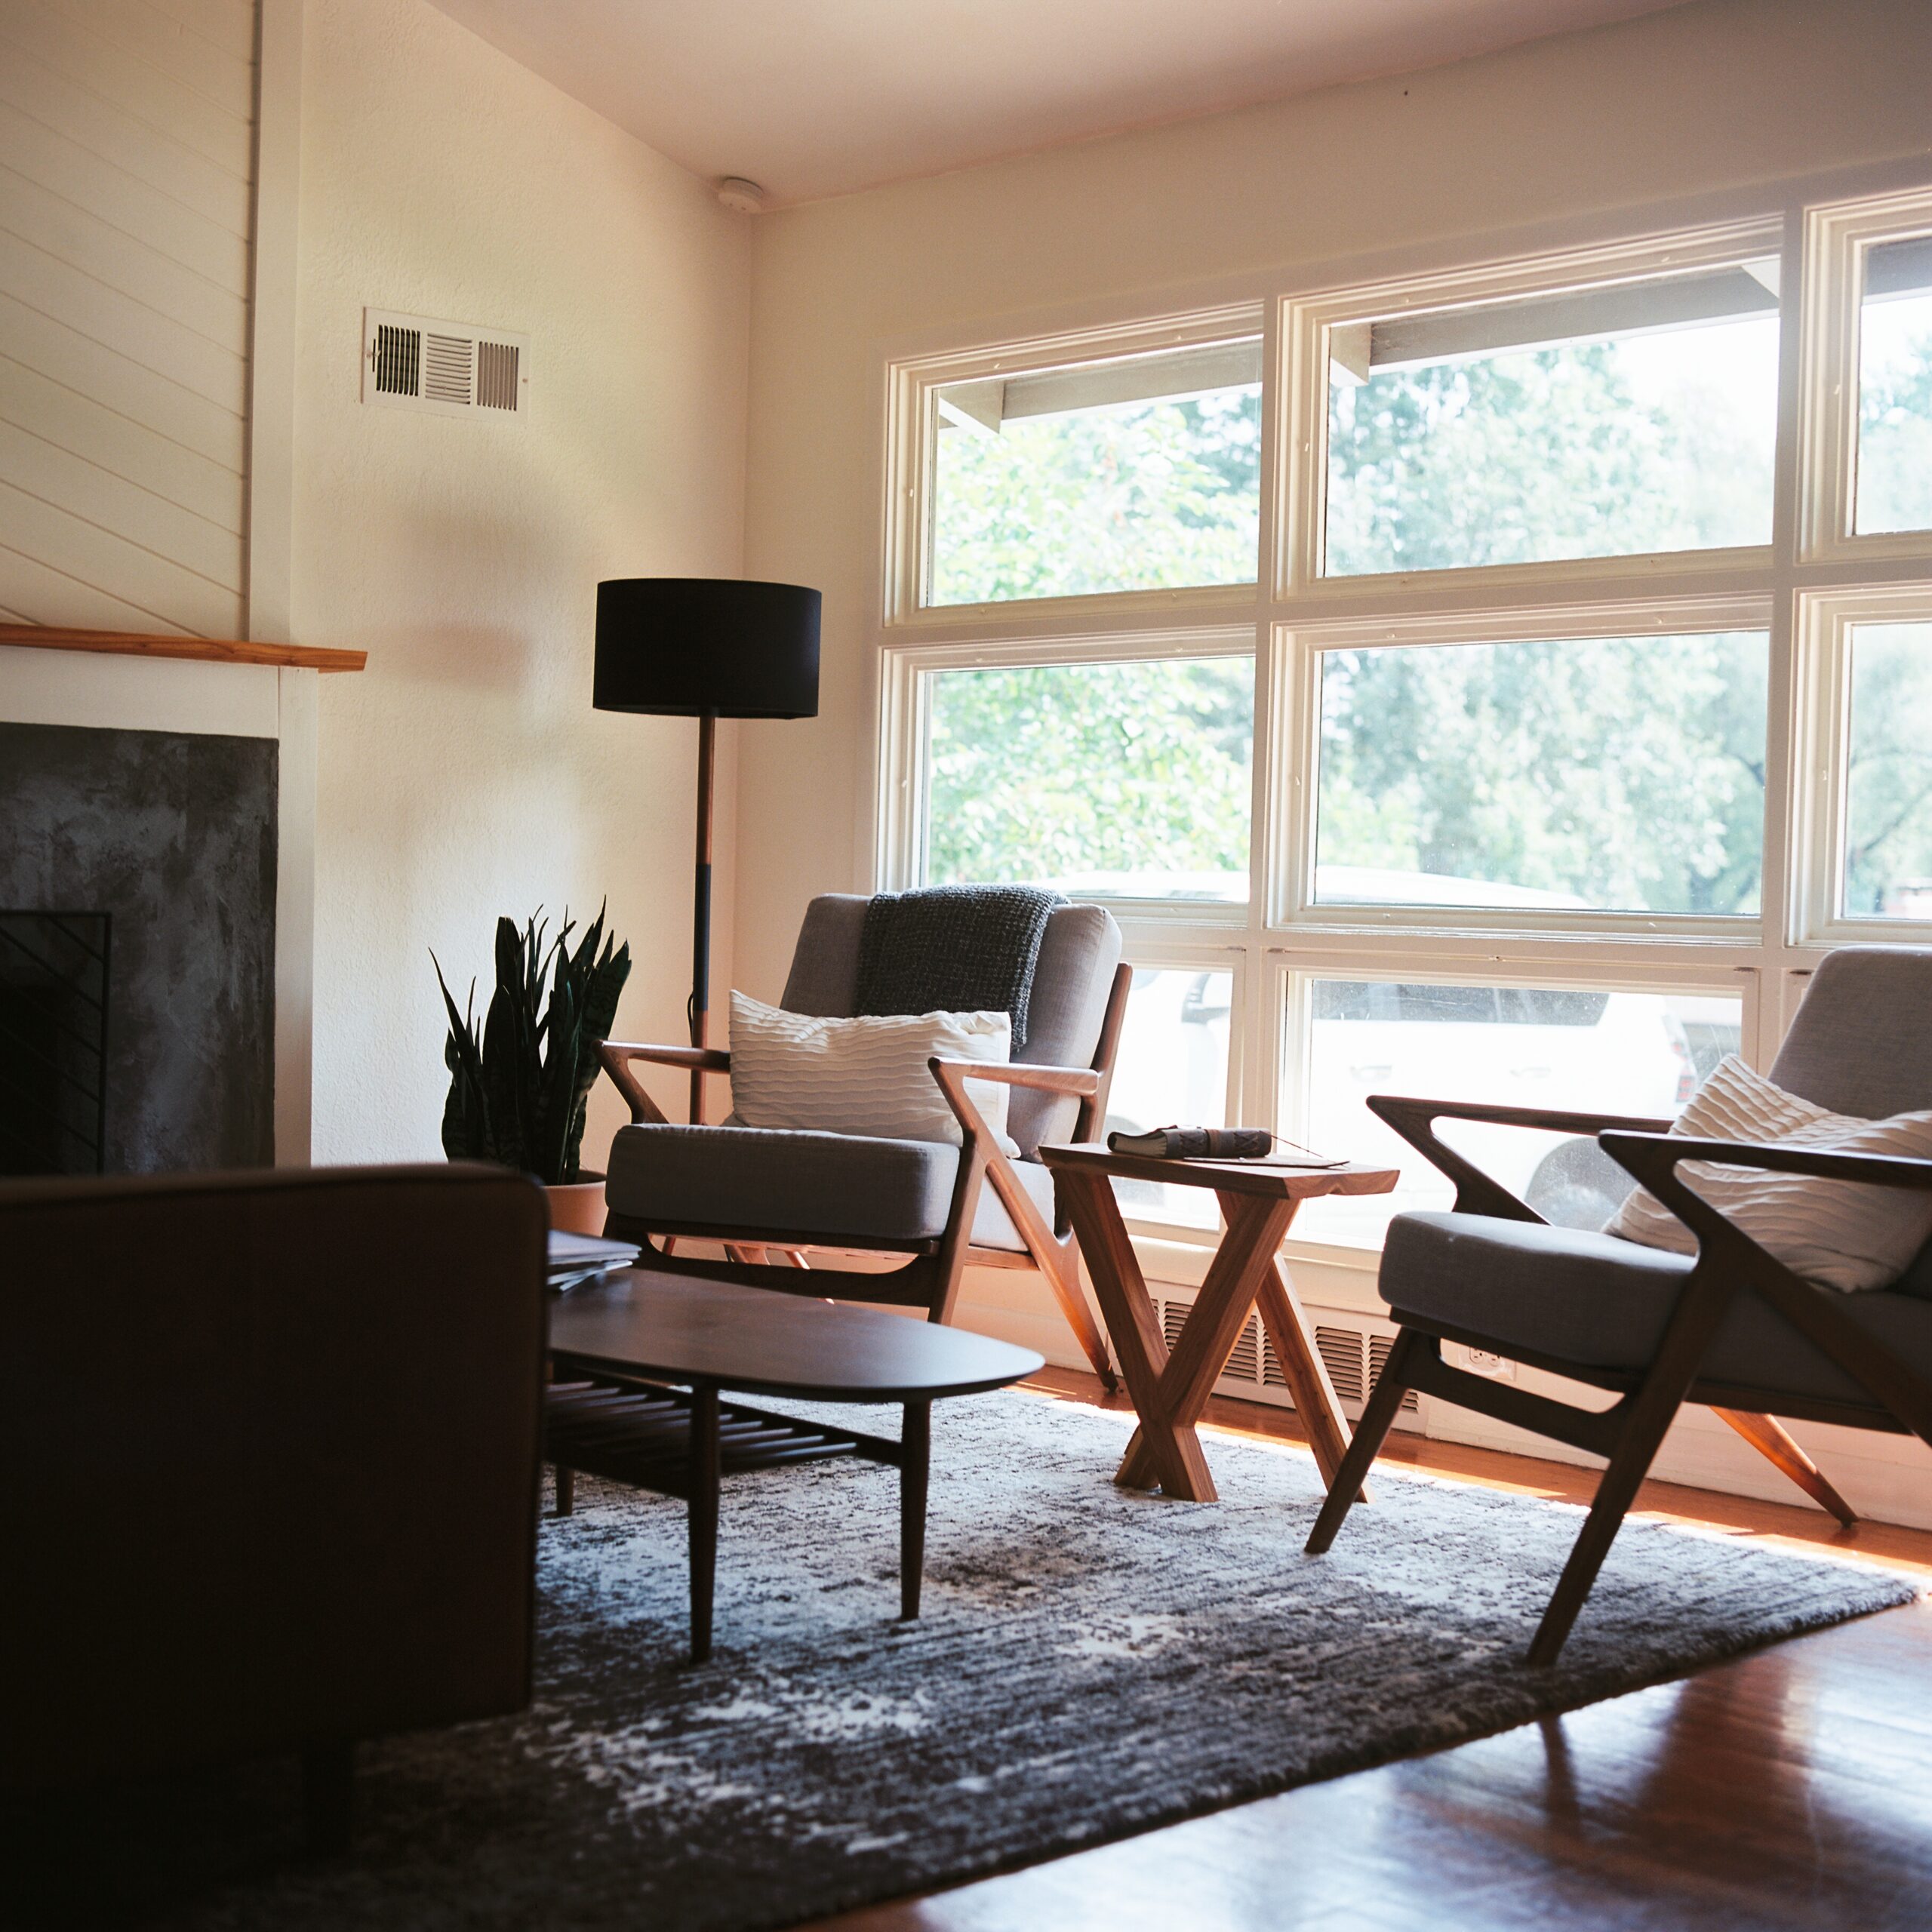 Midcentury modern living room with neutral brown tones